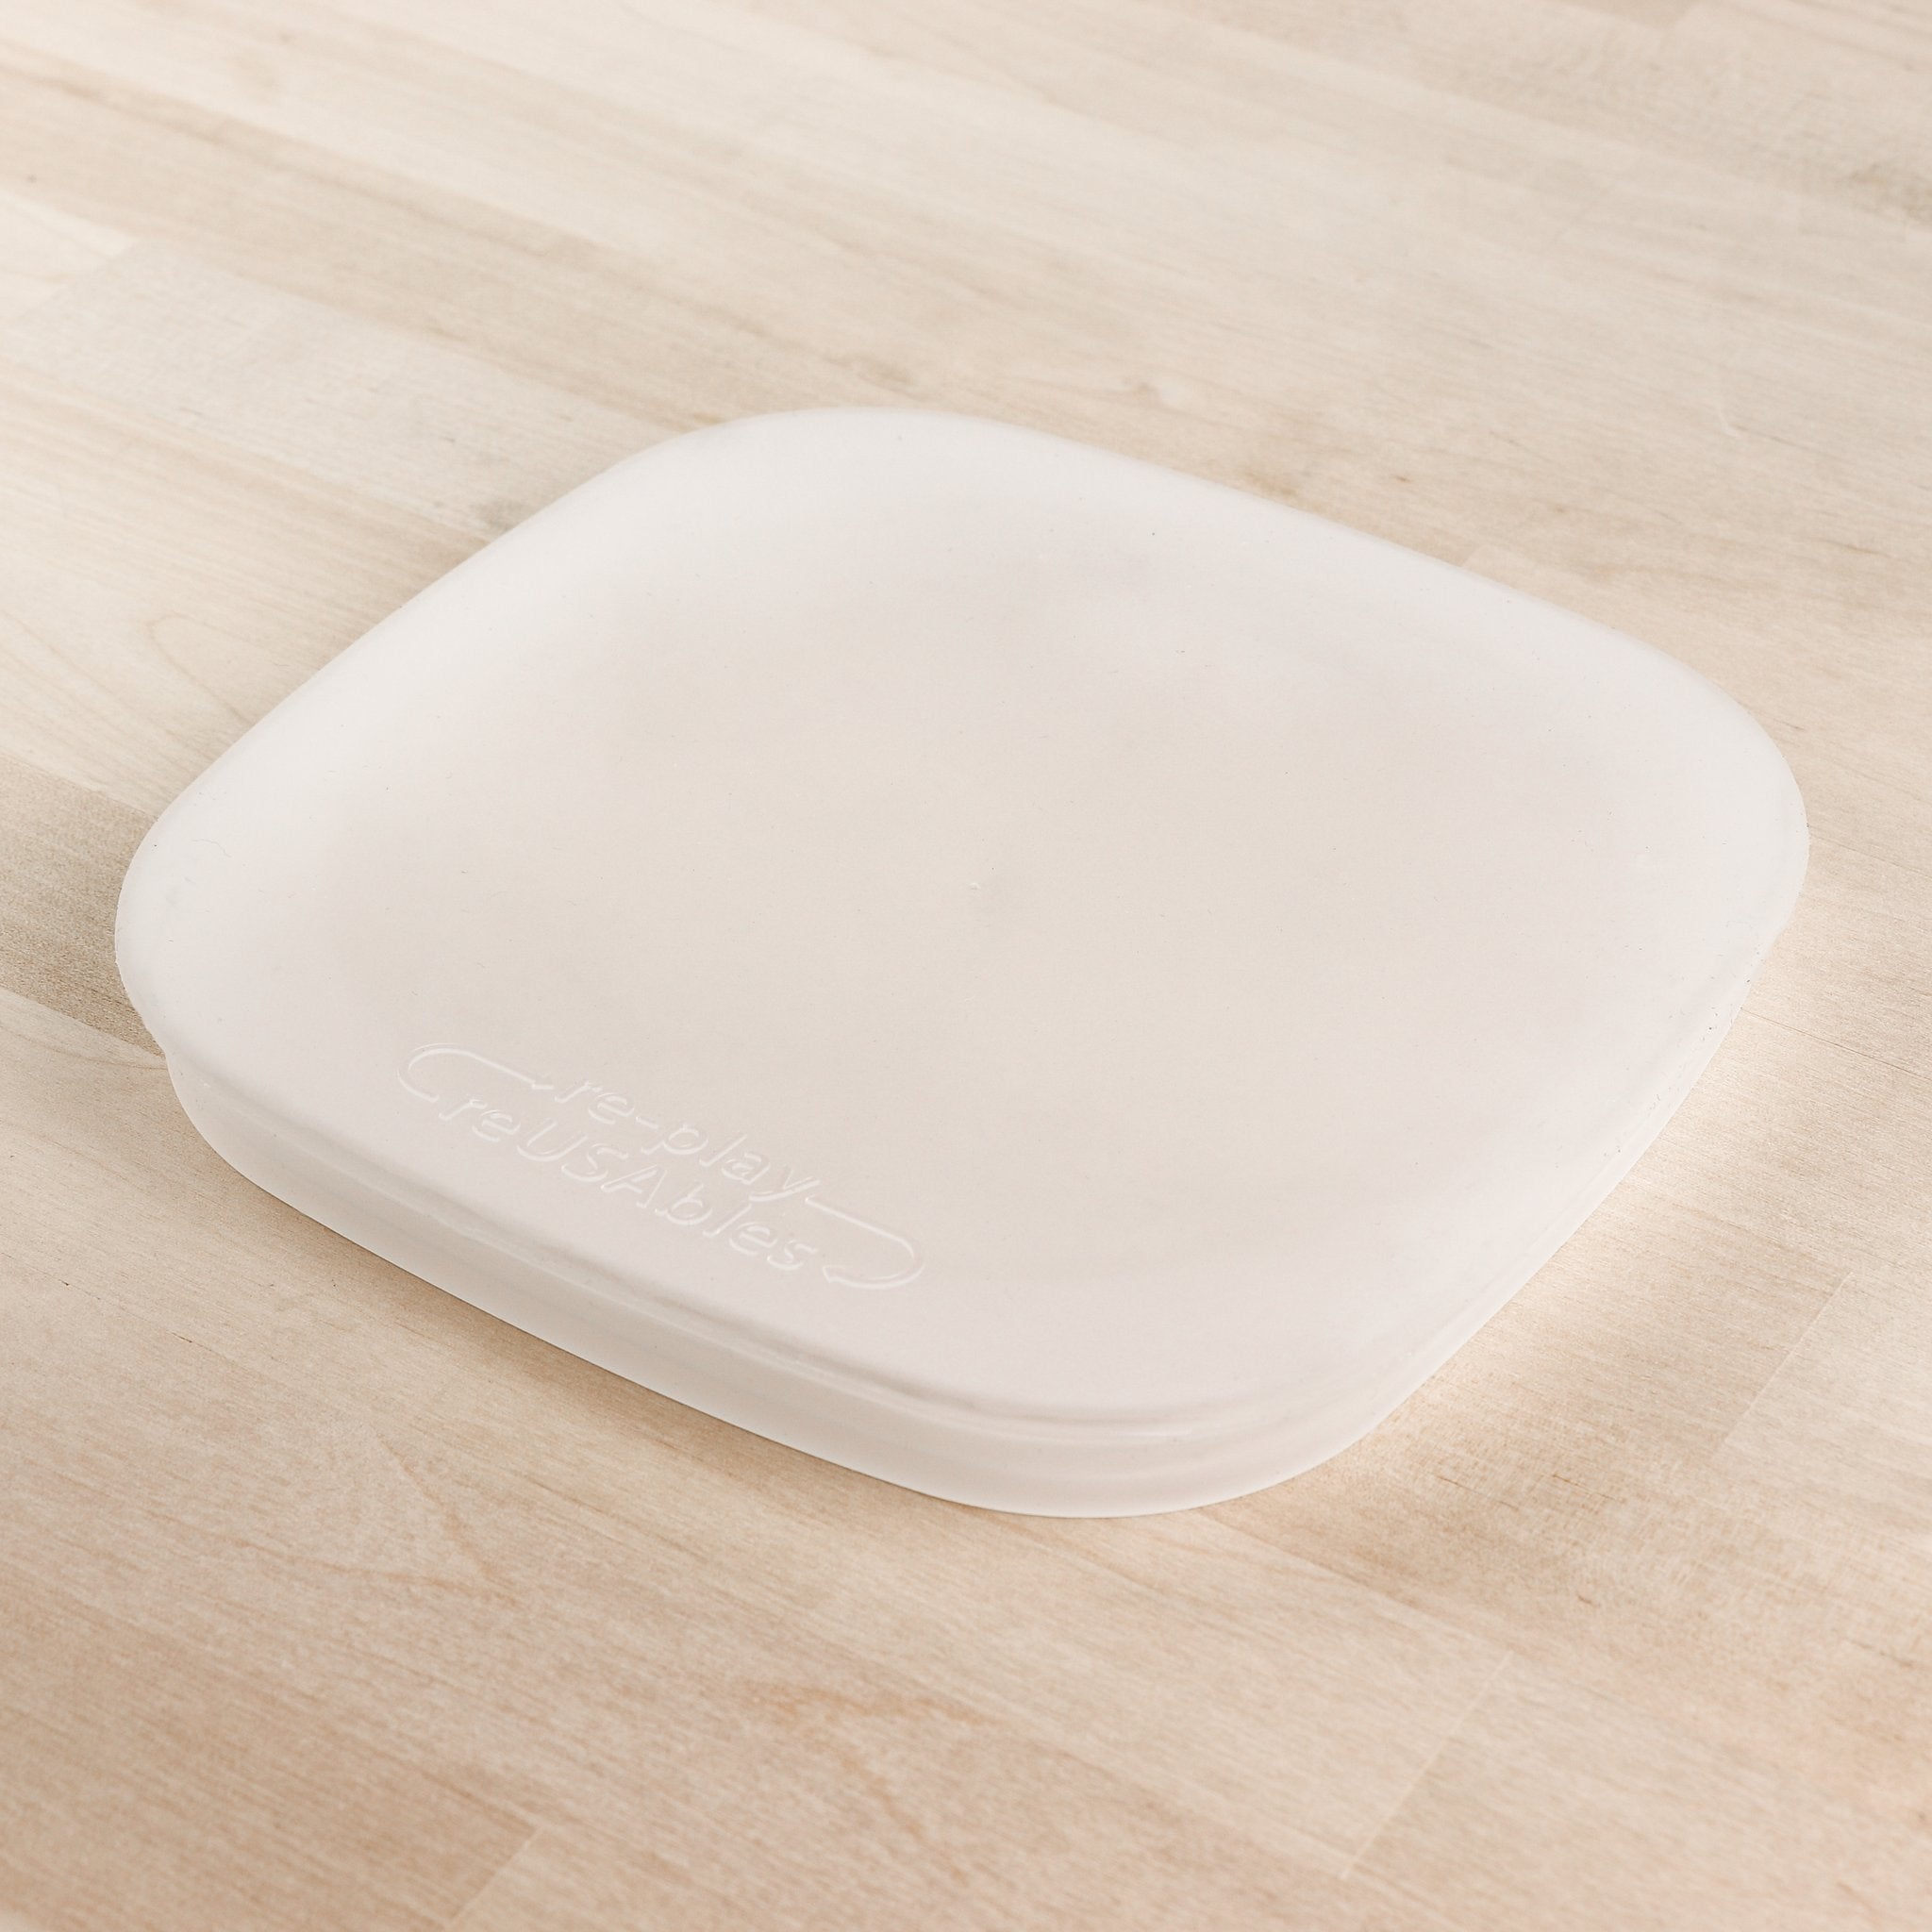 Re-Play - 7" Divided/Flat Plate Silicone Lid All Things Being Eco